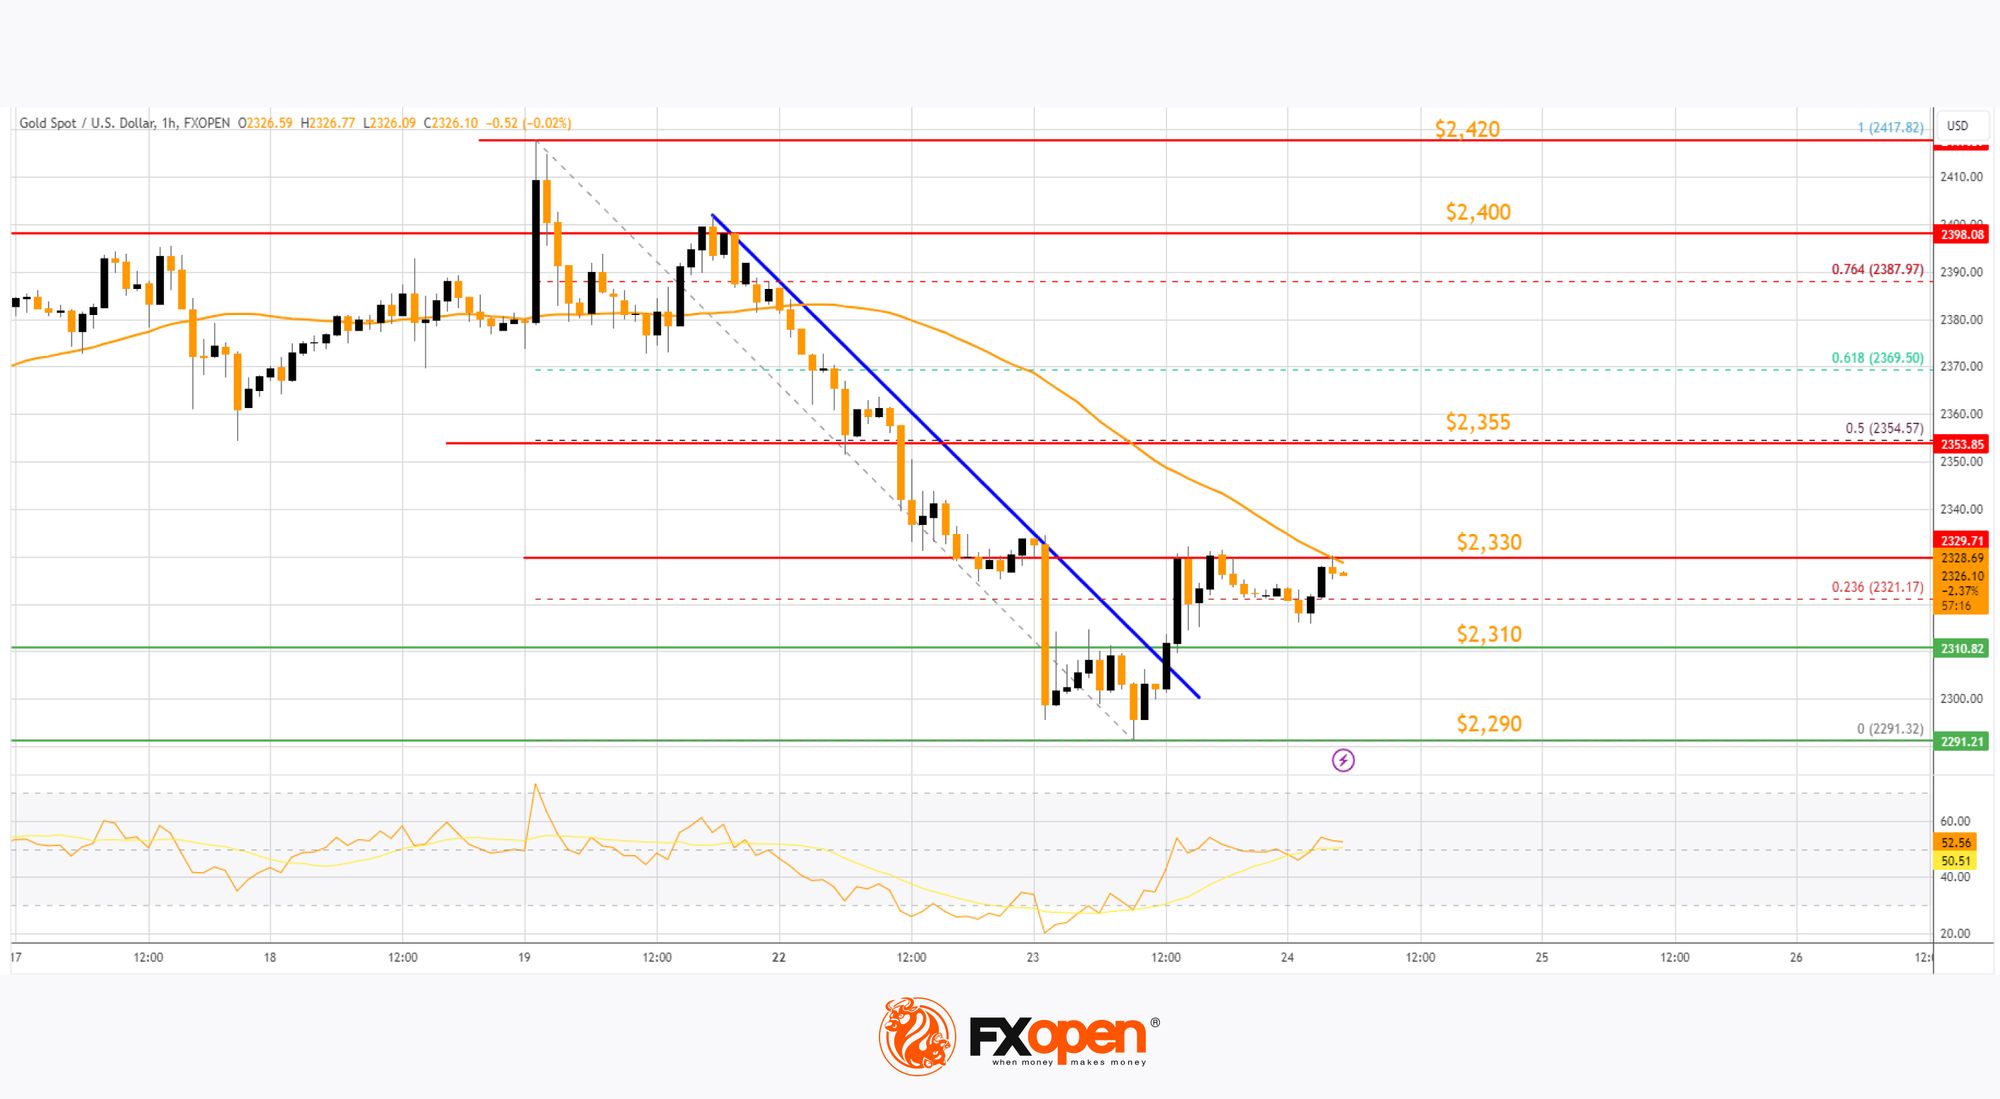 Market Analysis: Gold Price Corrects Gains While Oil Price Regains Strength